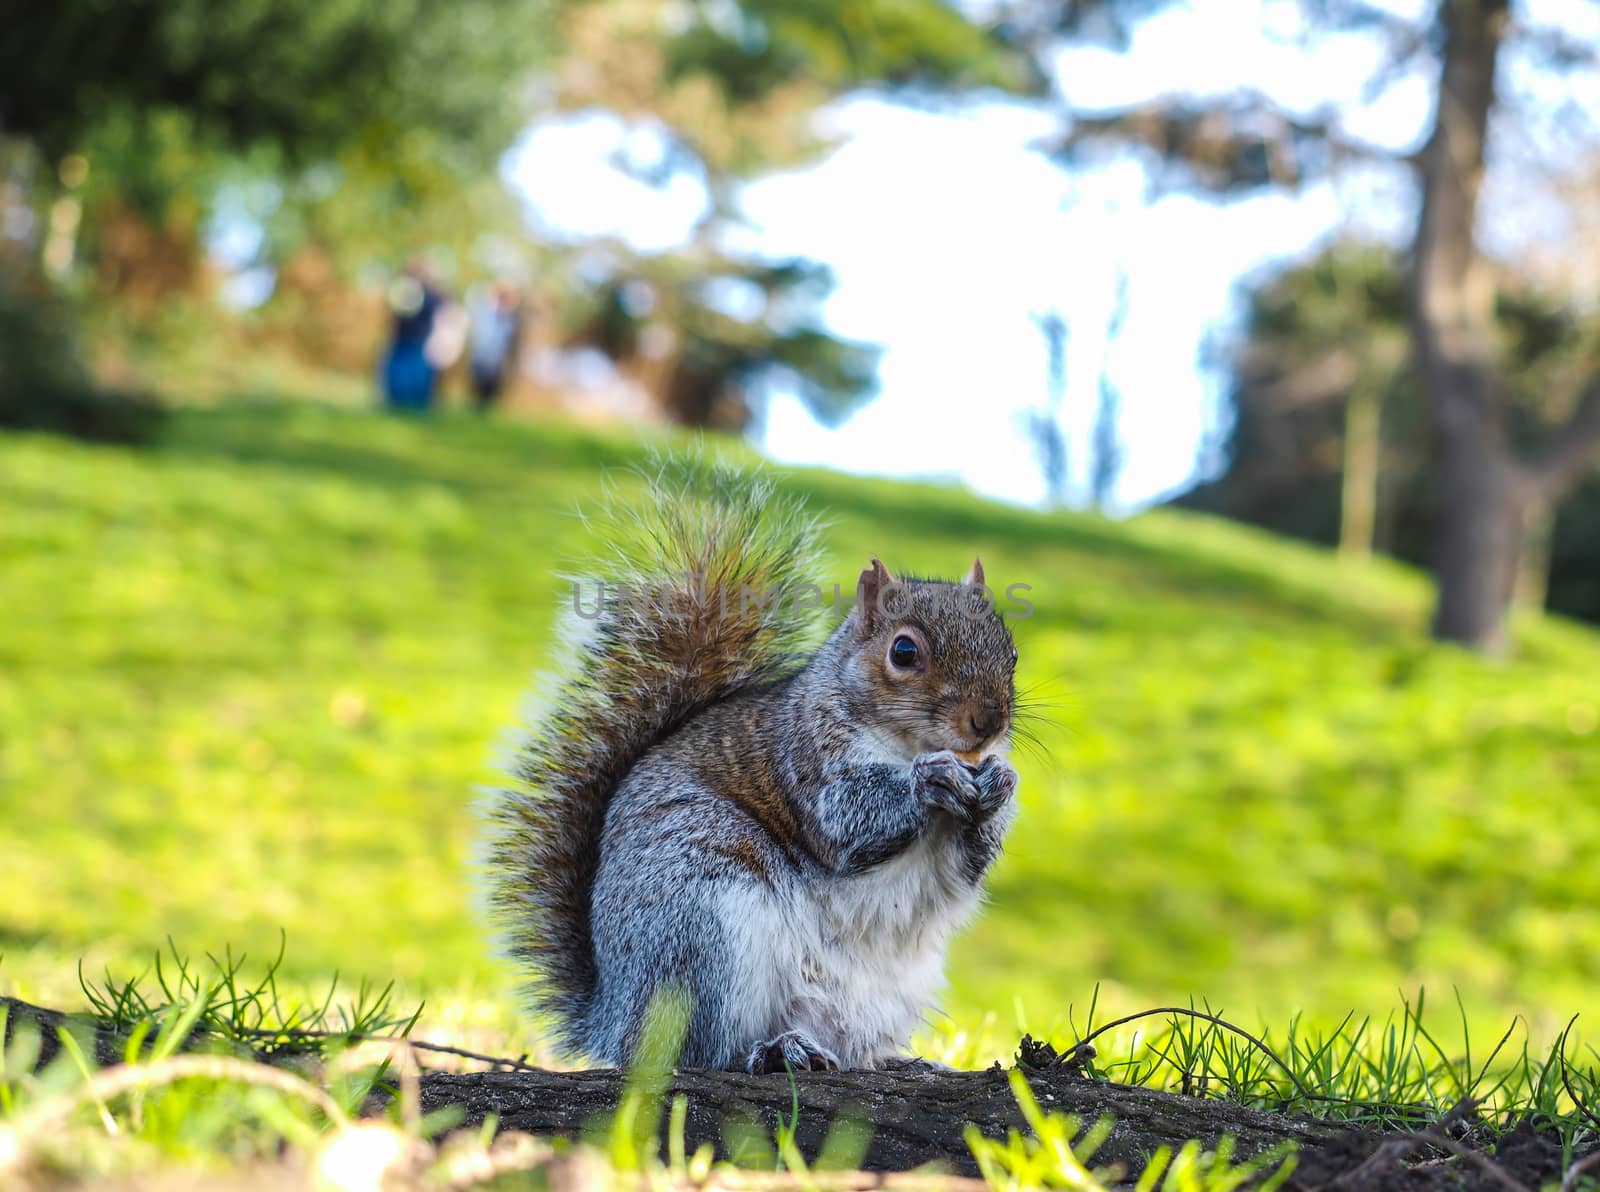 Squirrel eating on a treat in a park in shadow with green grass by Arvebettum